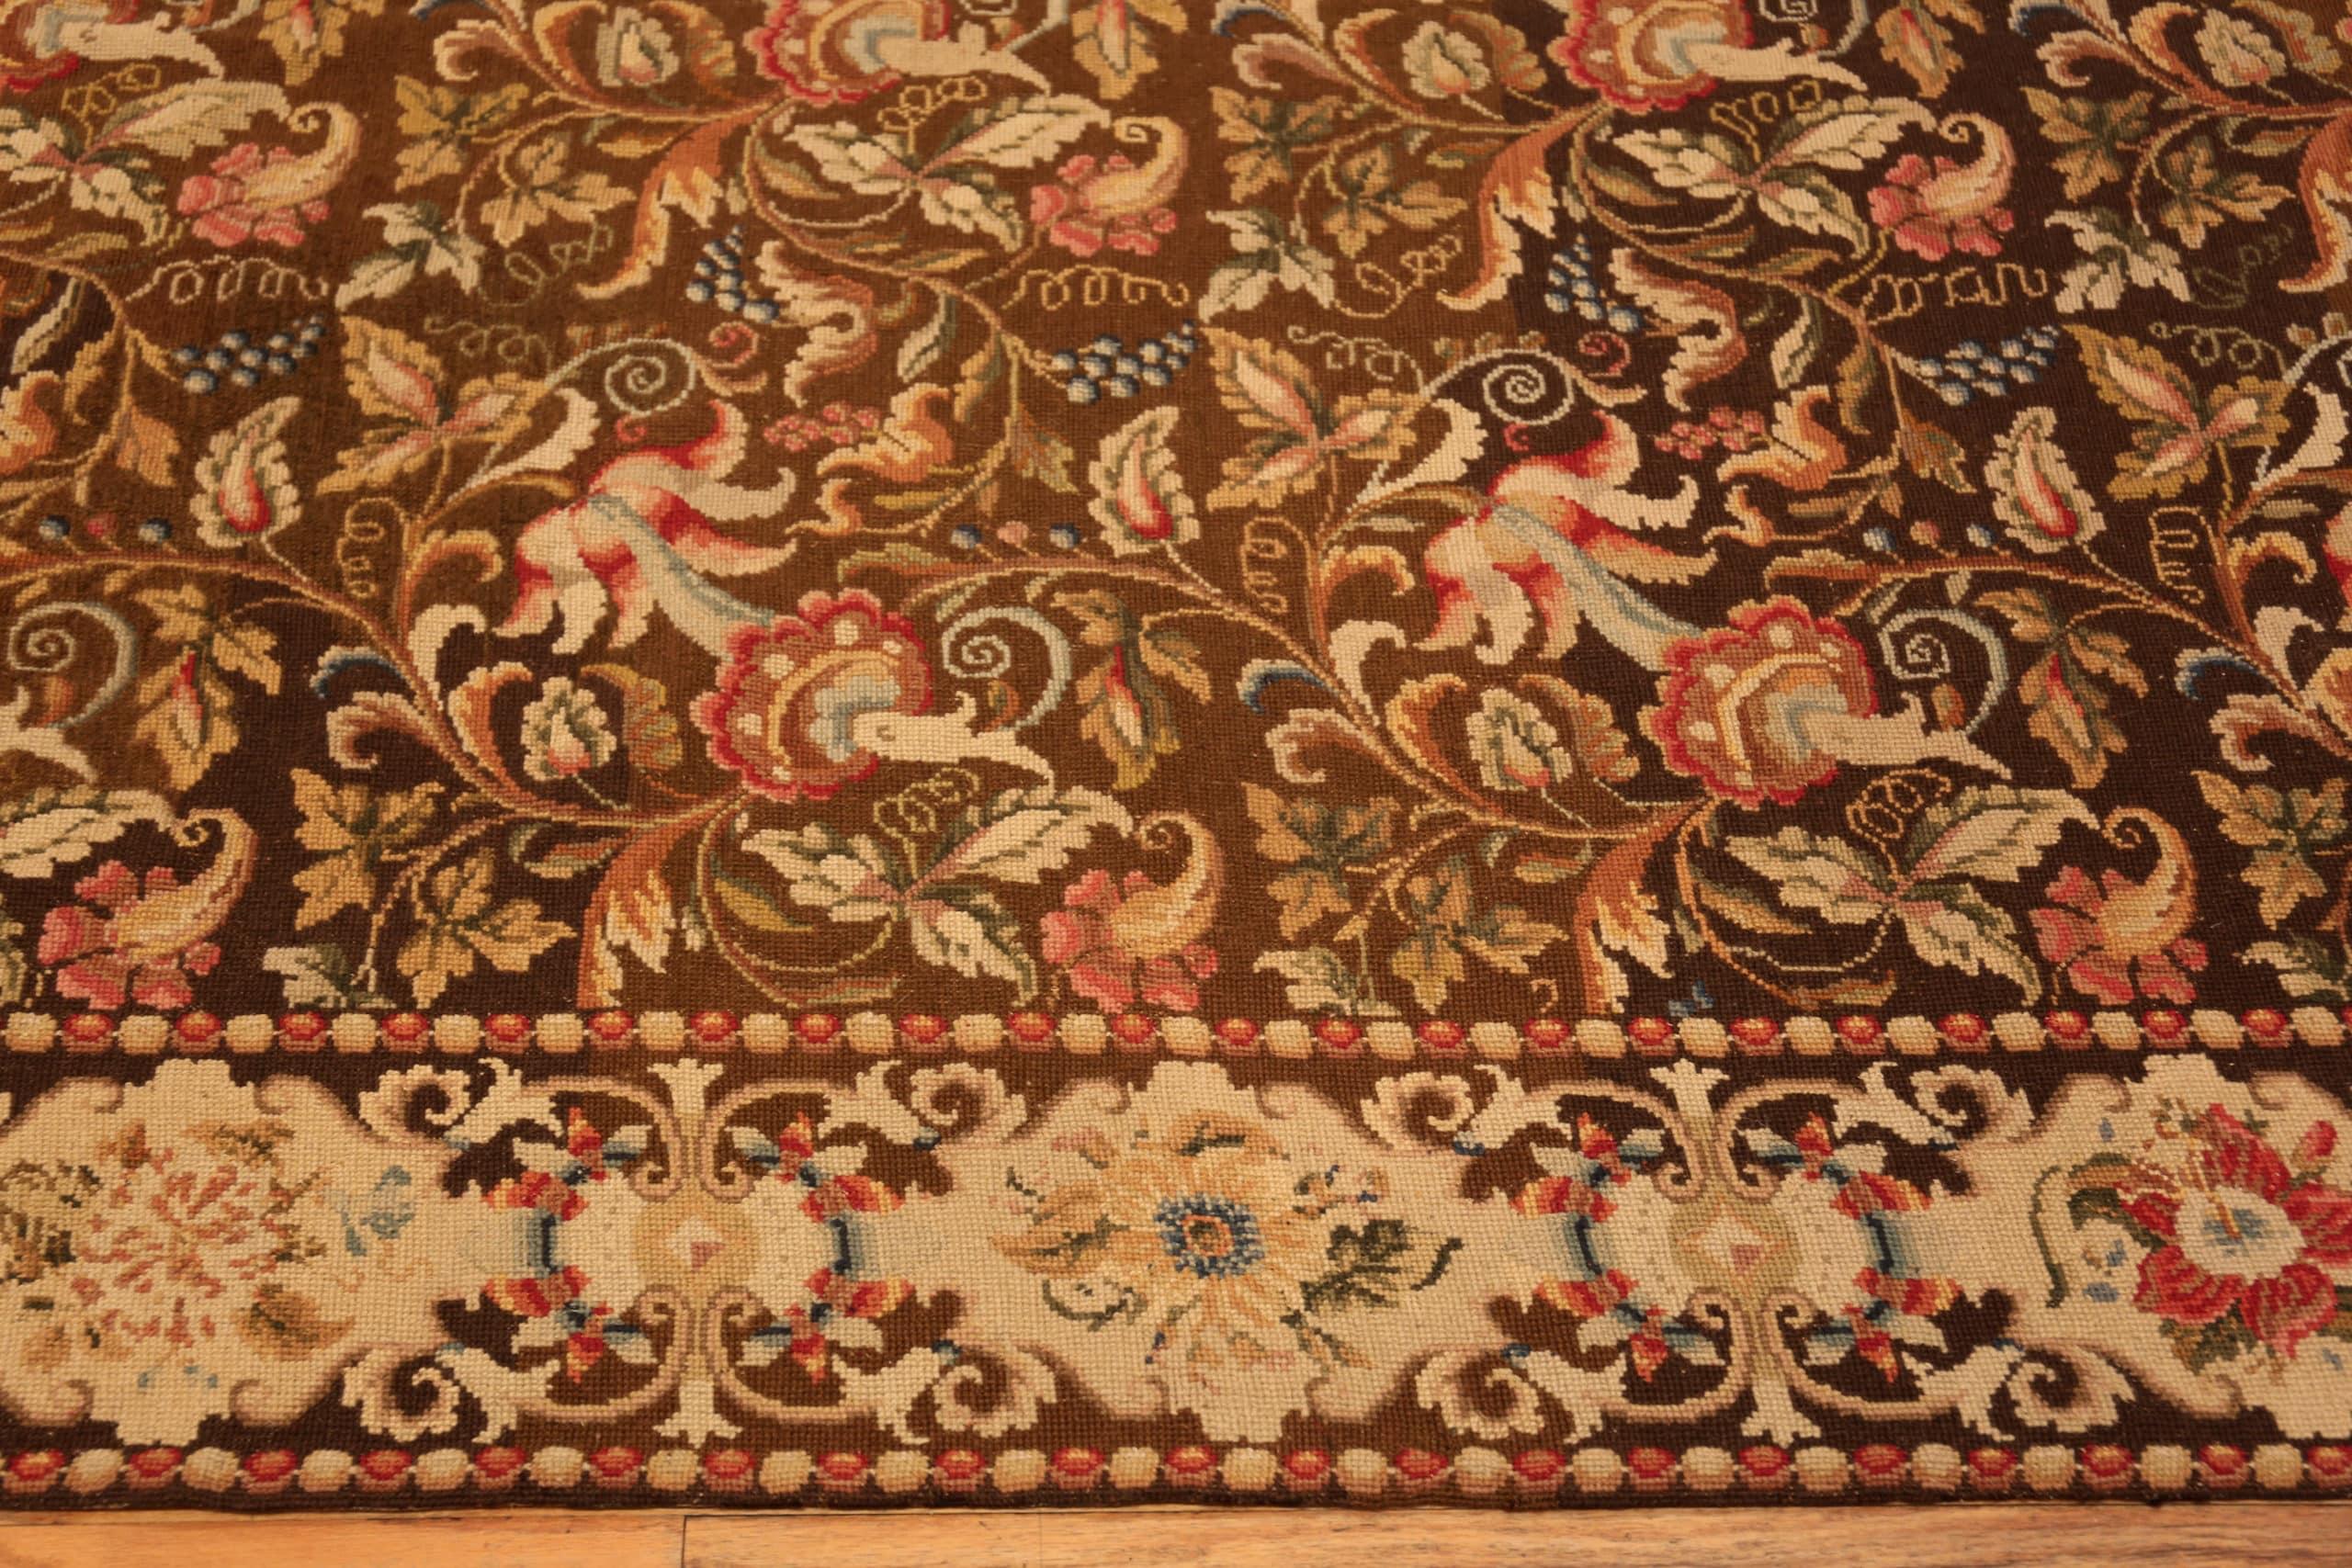 Hand-Knotted Floral Design Antique English Needlepoint Flat Weave Area Rug 6'3